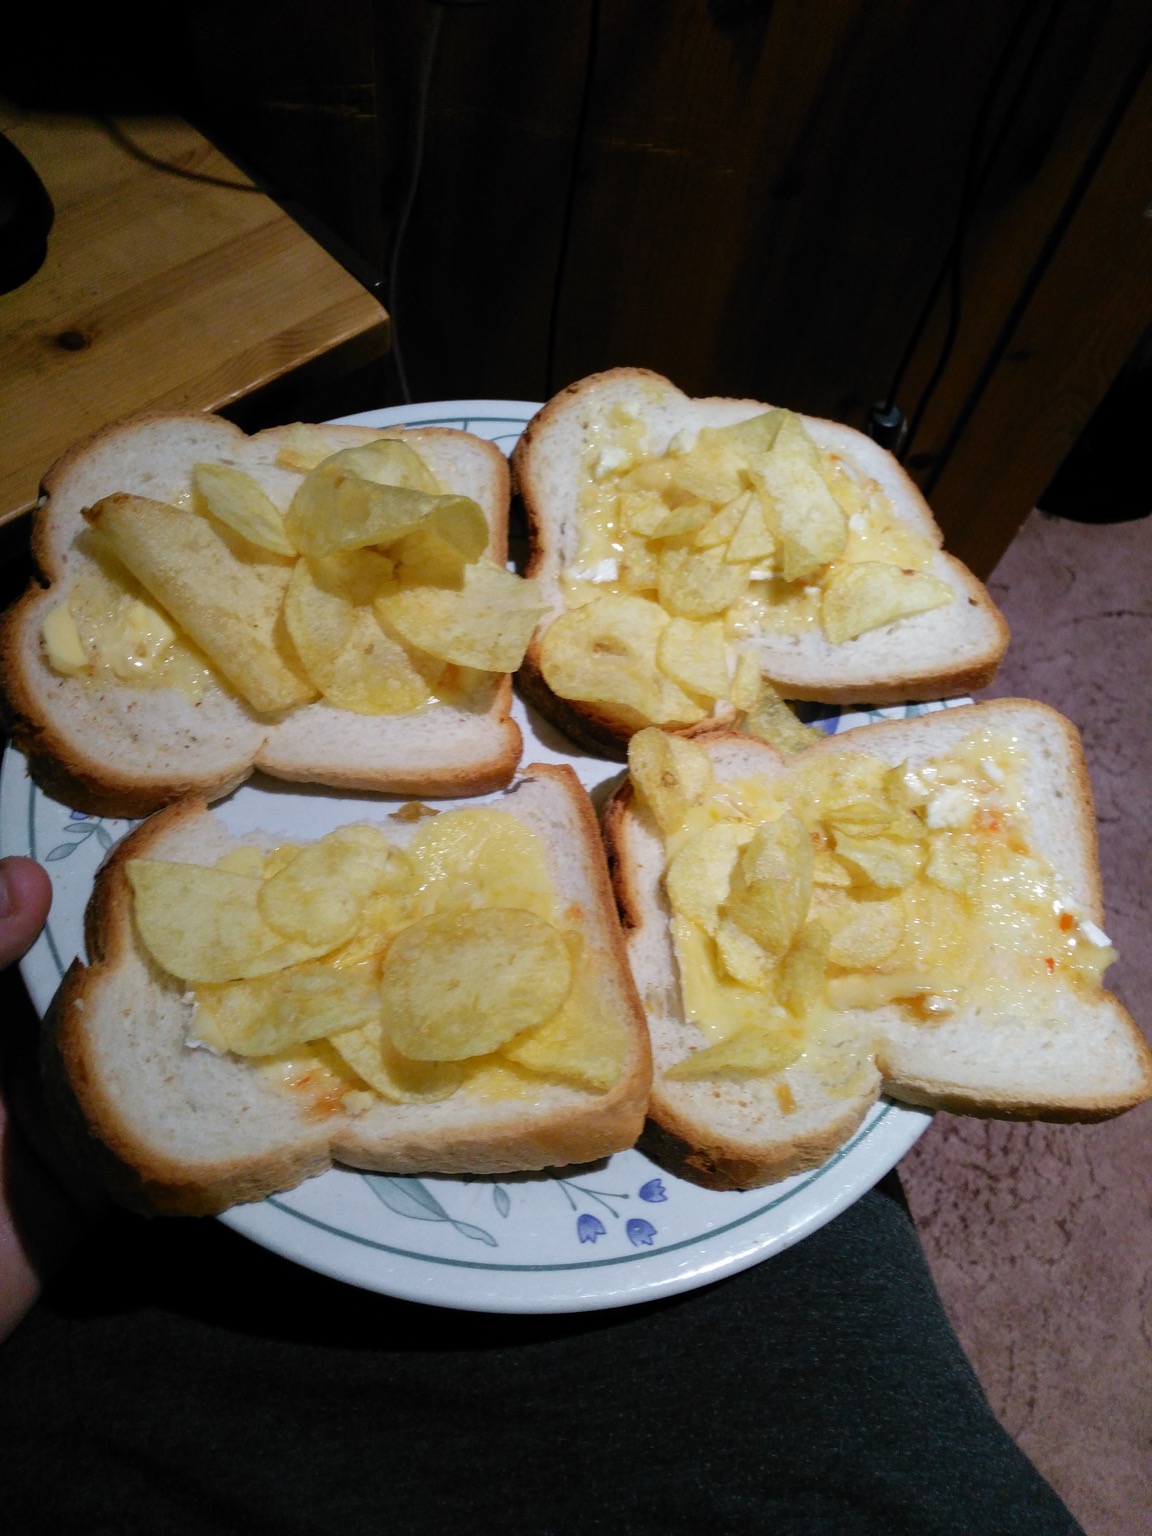 Four slices of white bread with crisps and cheese